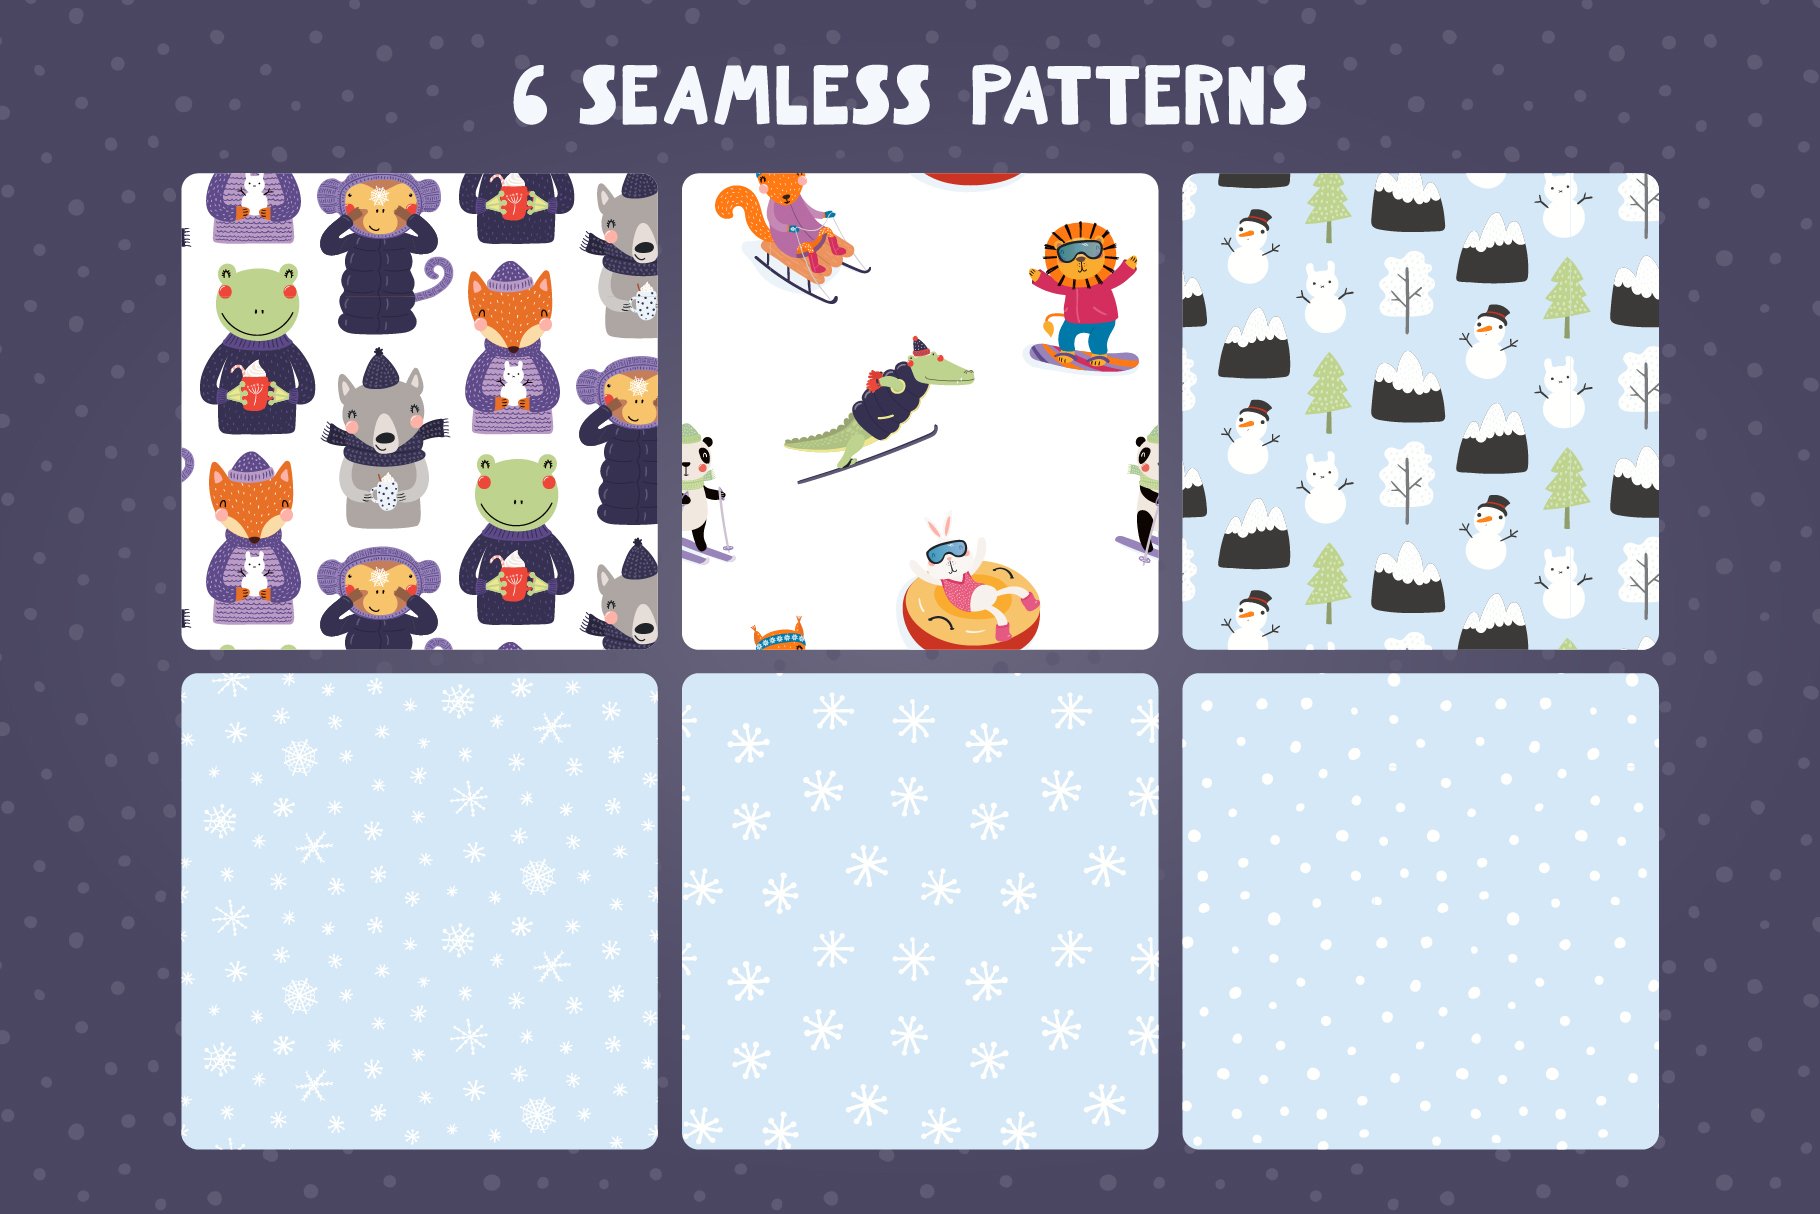 Patterns with winter animals.